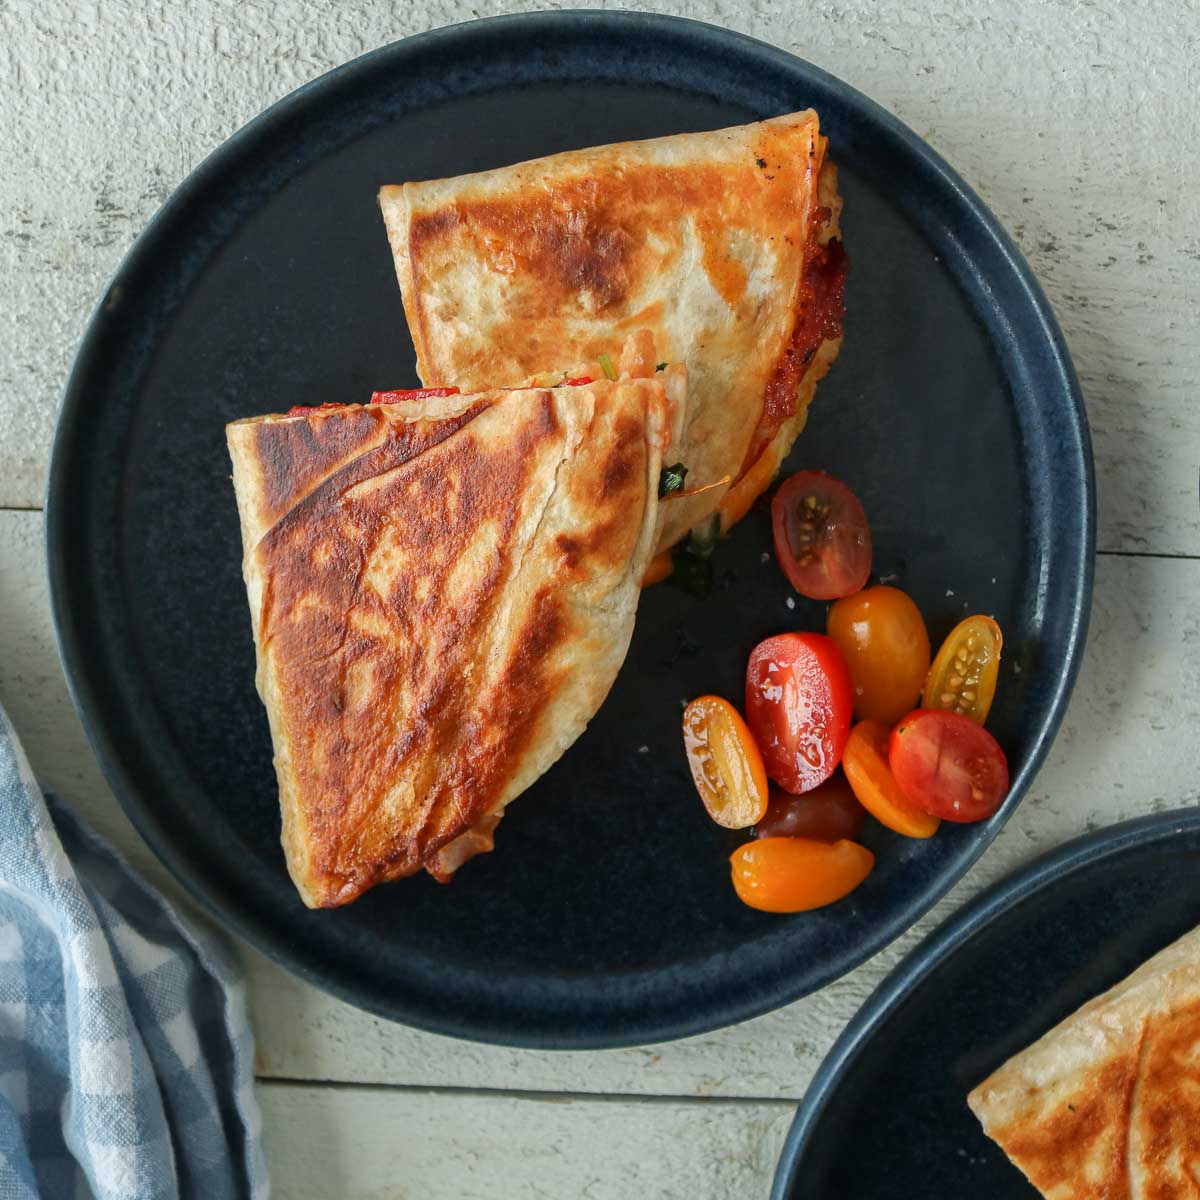 Plated quesadillas with grape tomatoes.